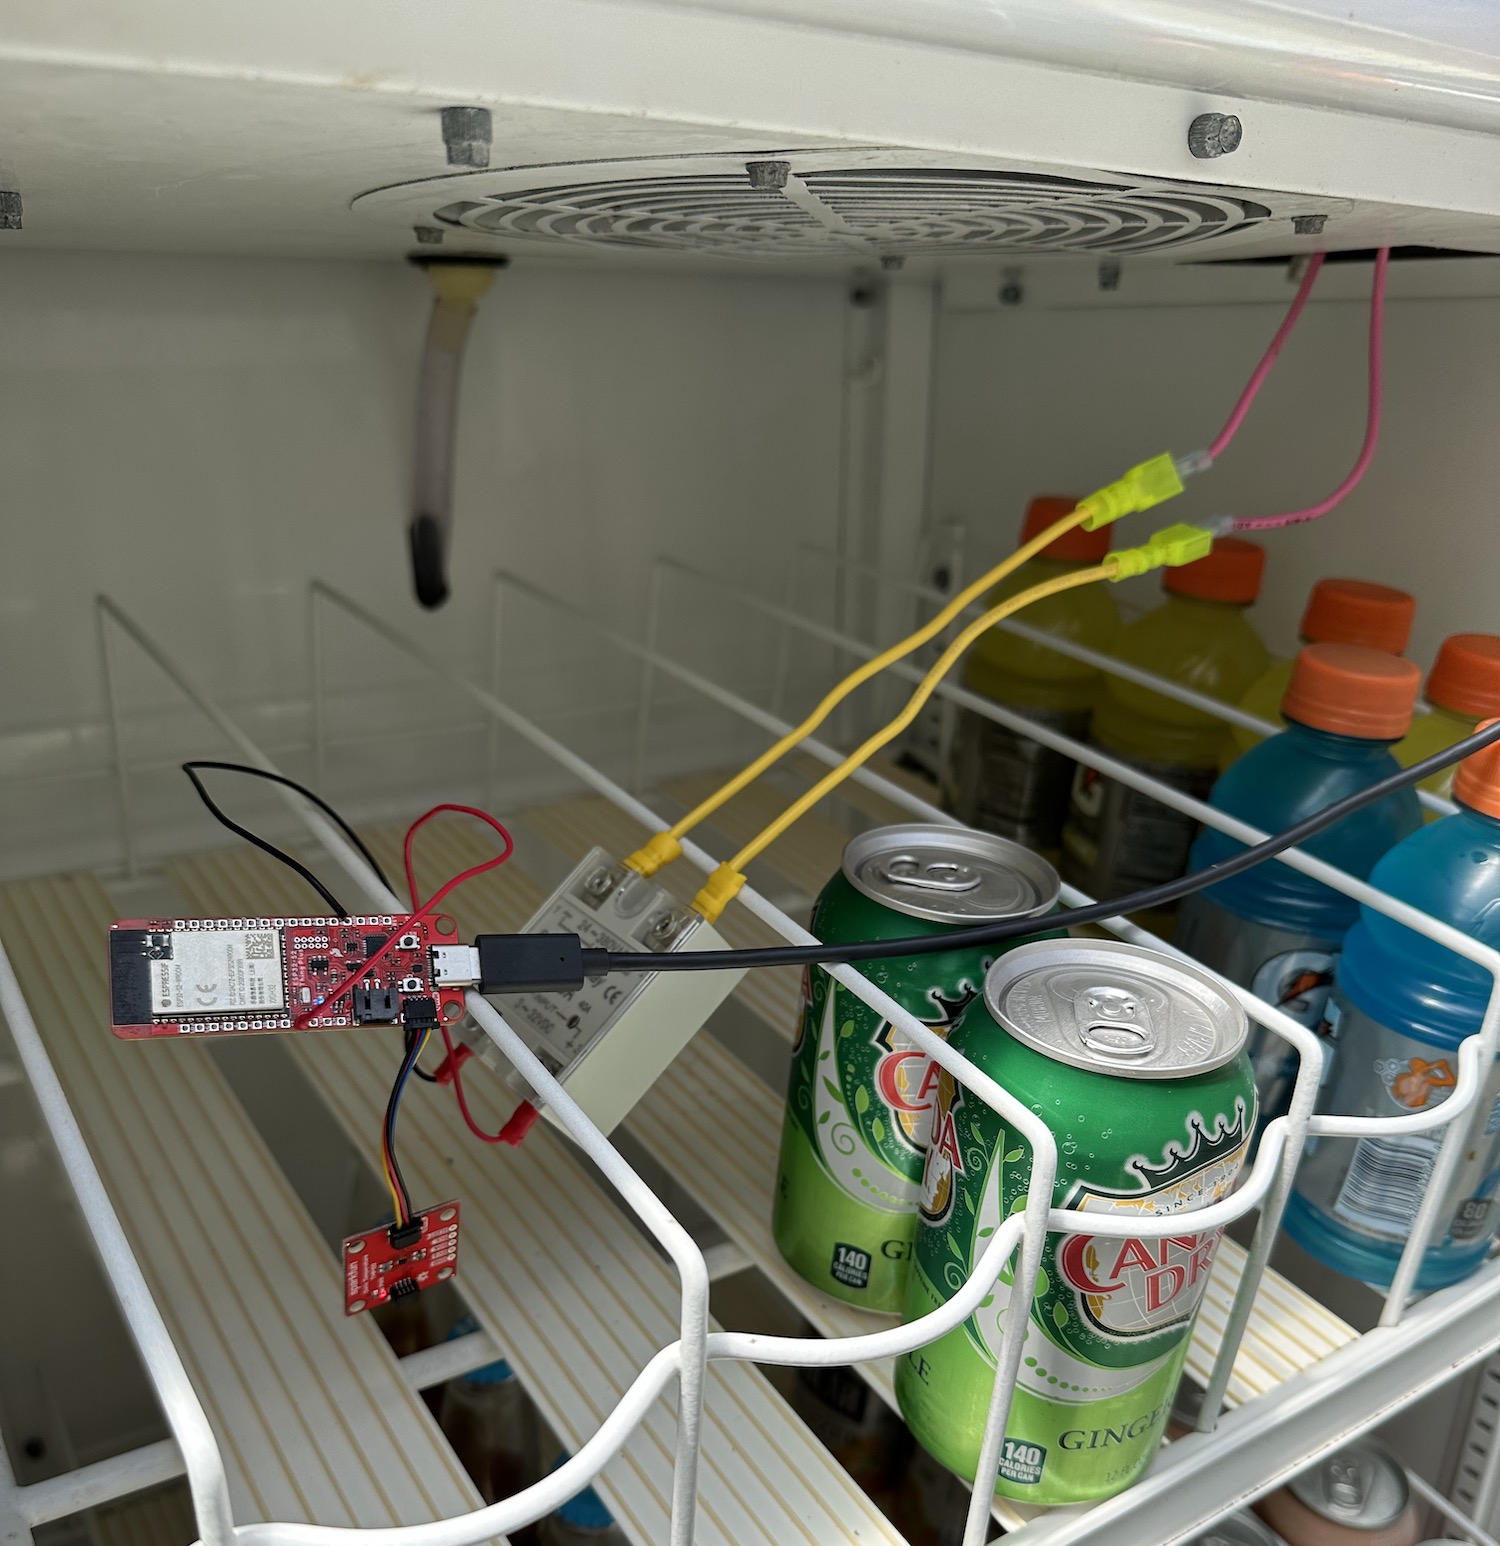 The inside of the fridge, showing the microcontroller and peripherals with wires connecting them.